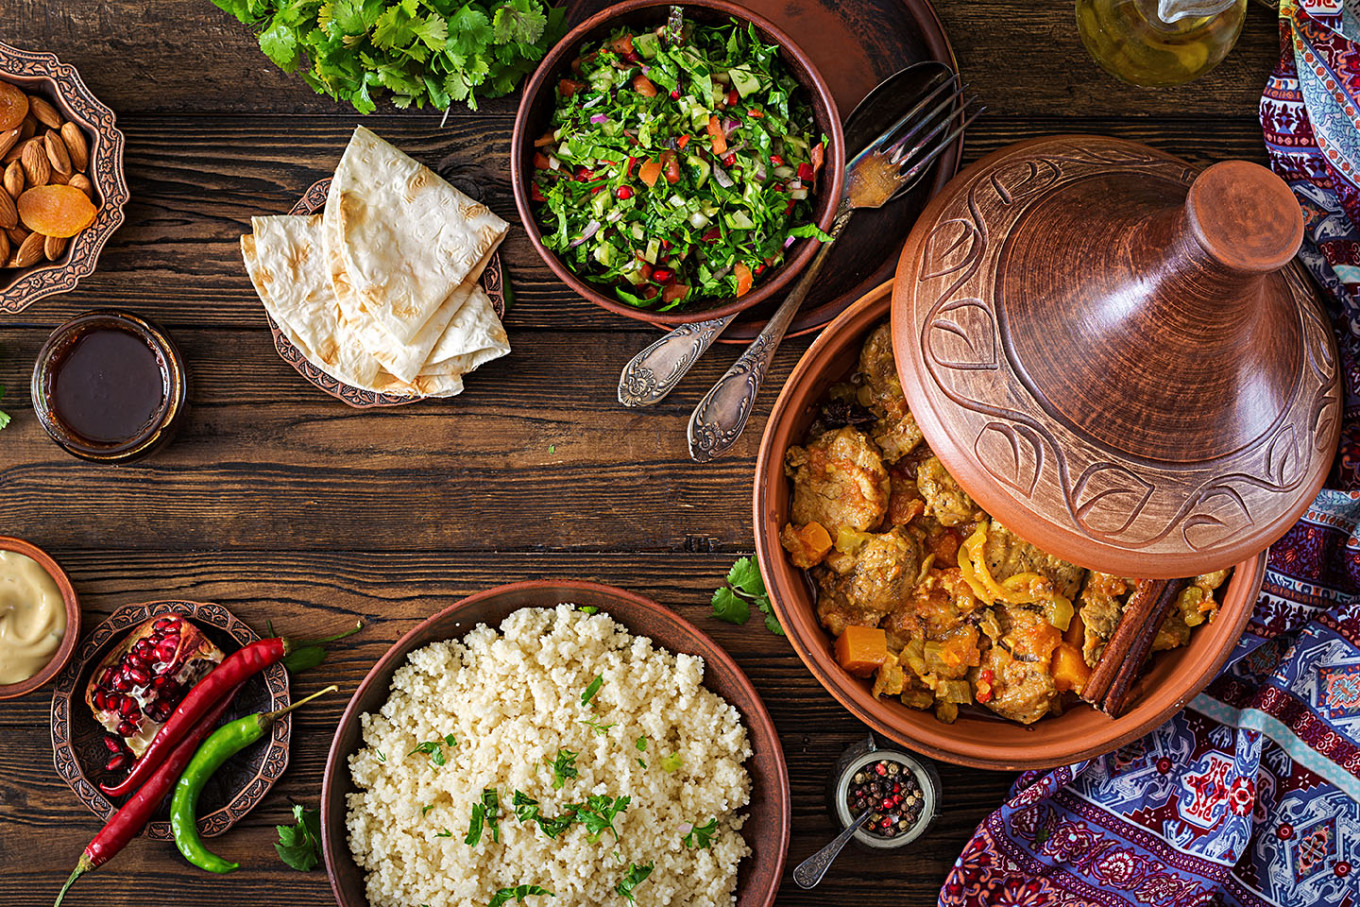 Feast on Moroccan Cuisine This Weekend